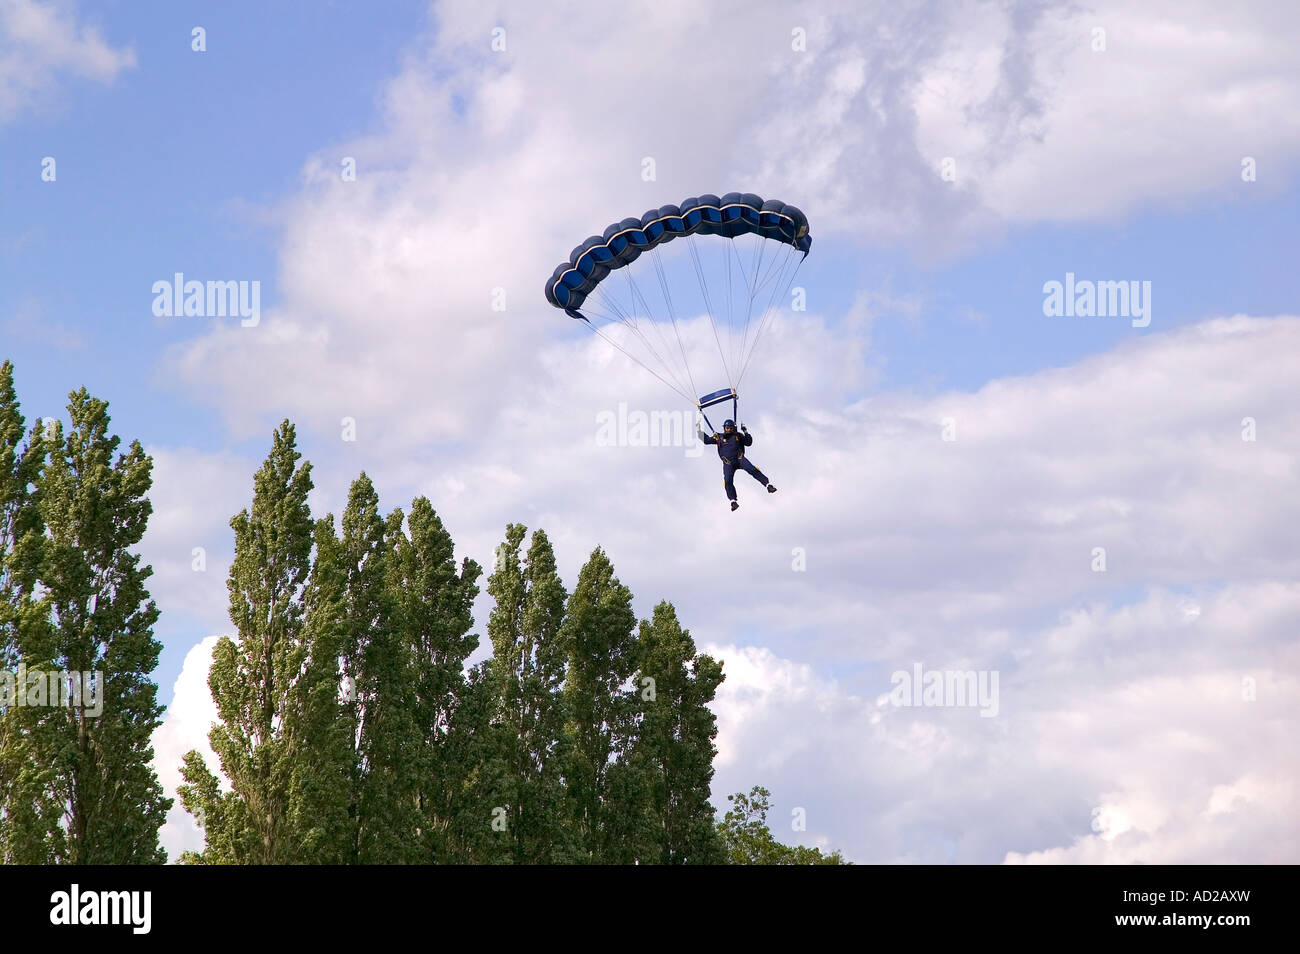 Parachutist narrowly missing some tree s as he comes in to land Stock Photo